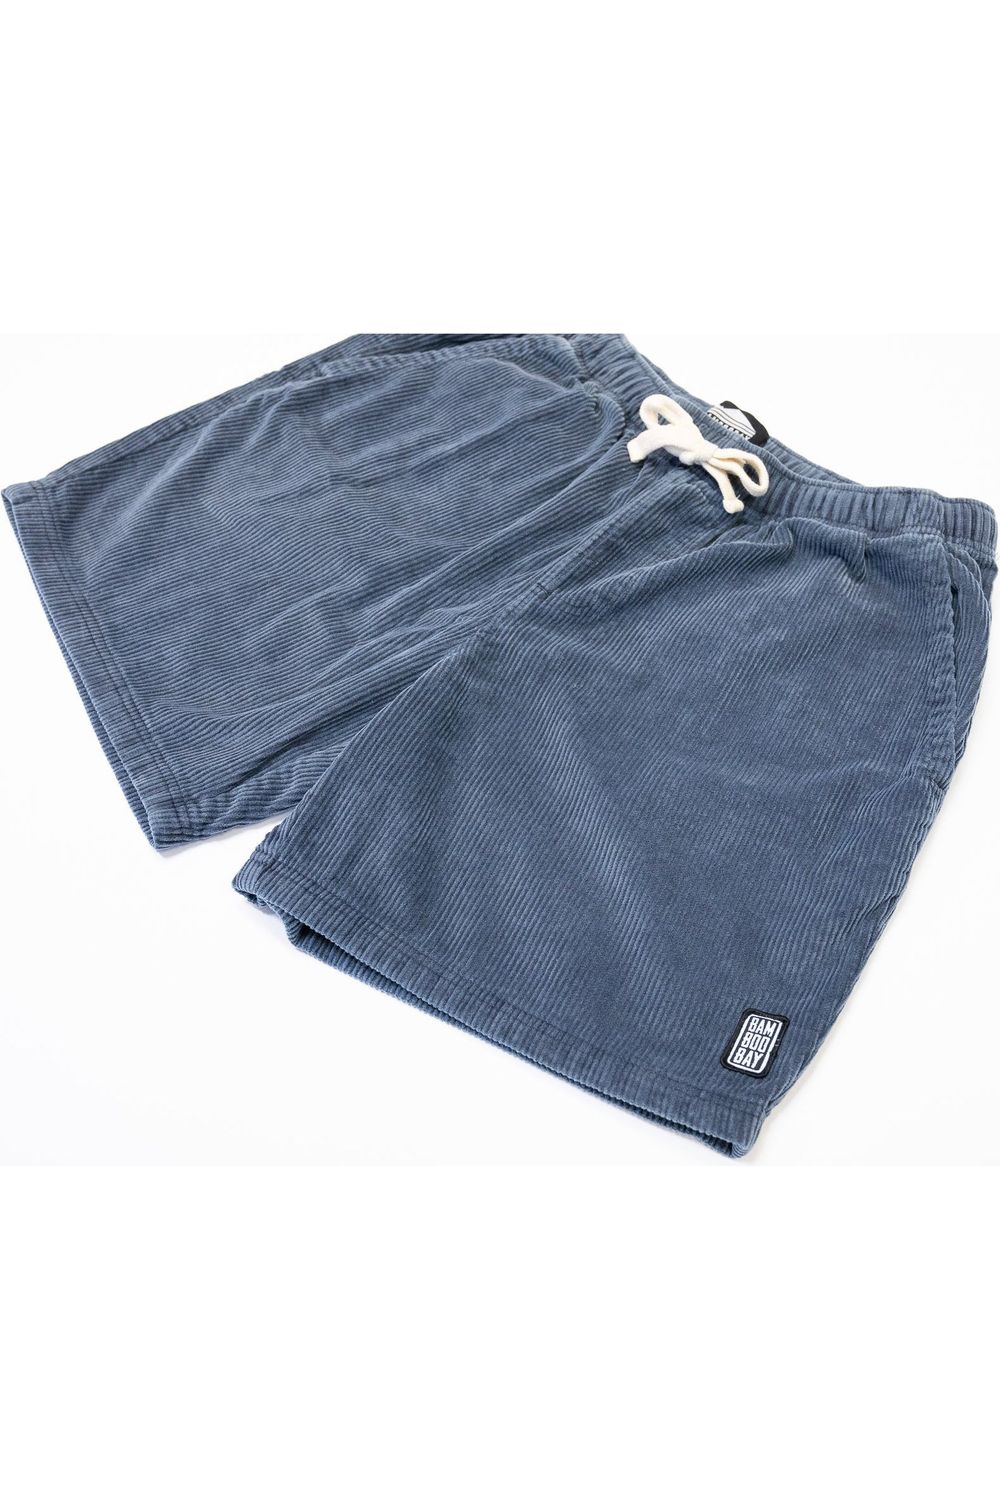 Bamboobay Cord Shorts in Navy. The image is taken in a studio and is a flatshot of the cord shorts